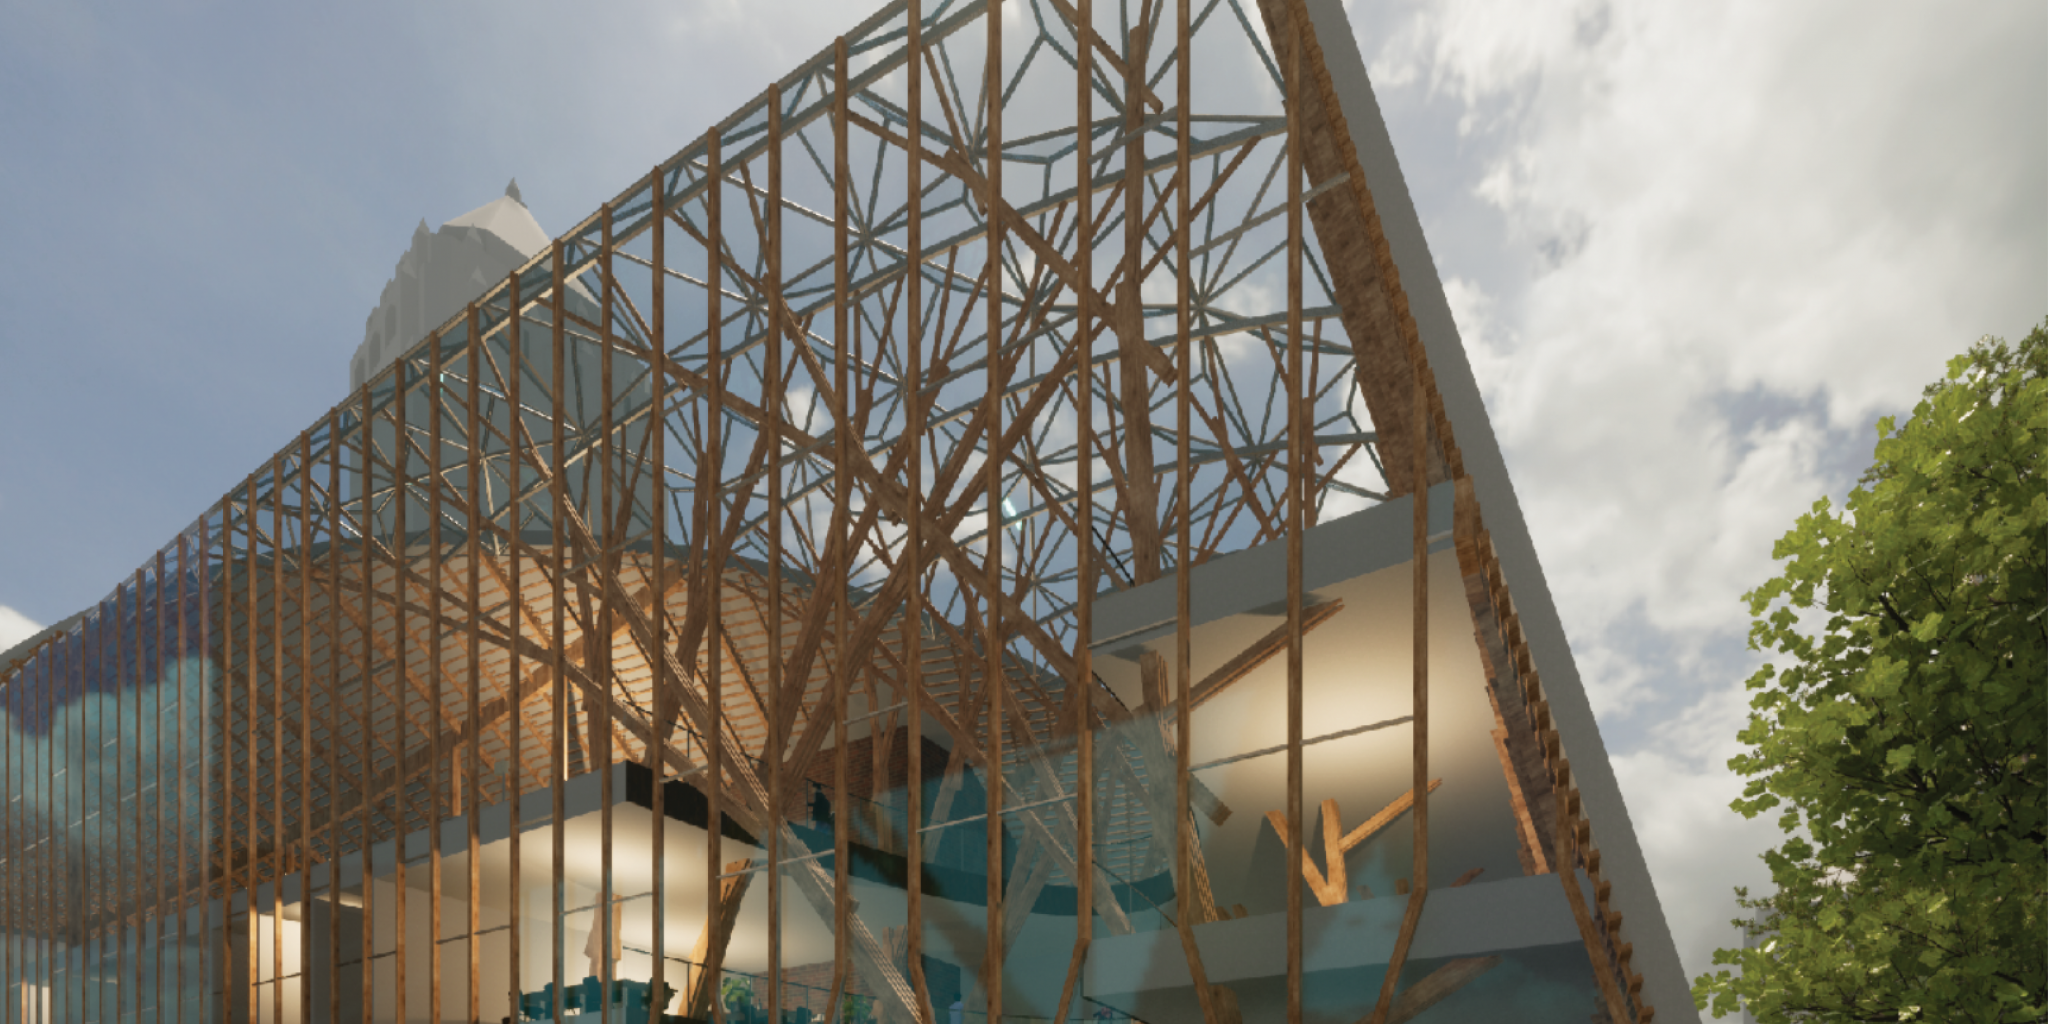 2022 Timber Design Student Competition Winner